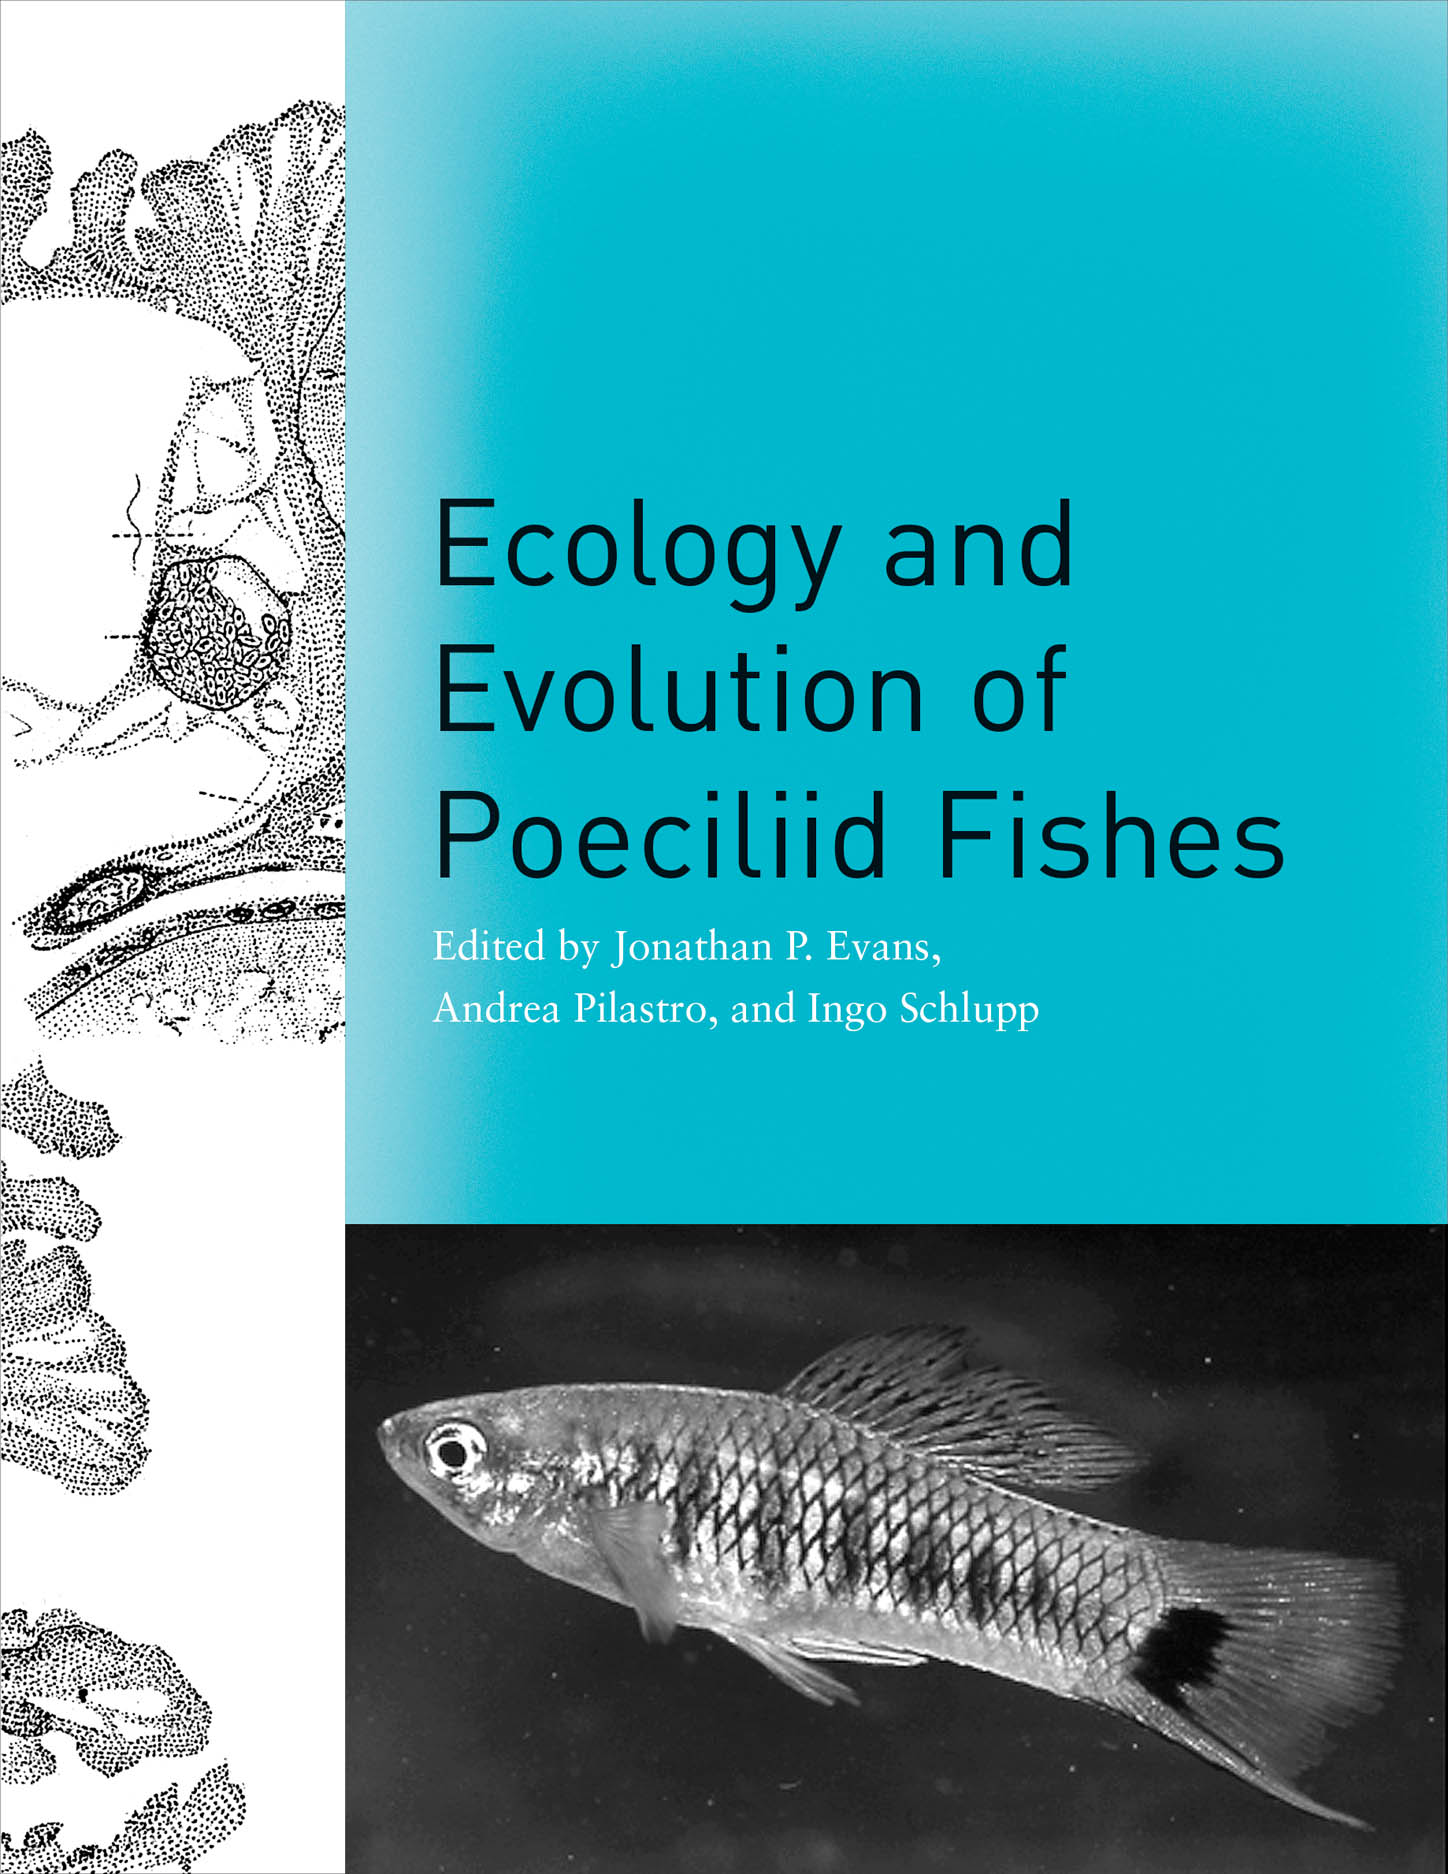 Ecology and Evolution of Poeciliid Fishes, Evans, Pilastro, Schlupp